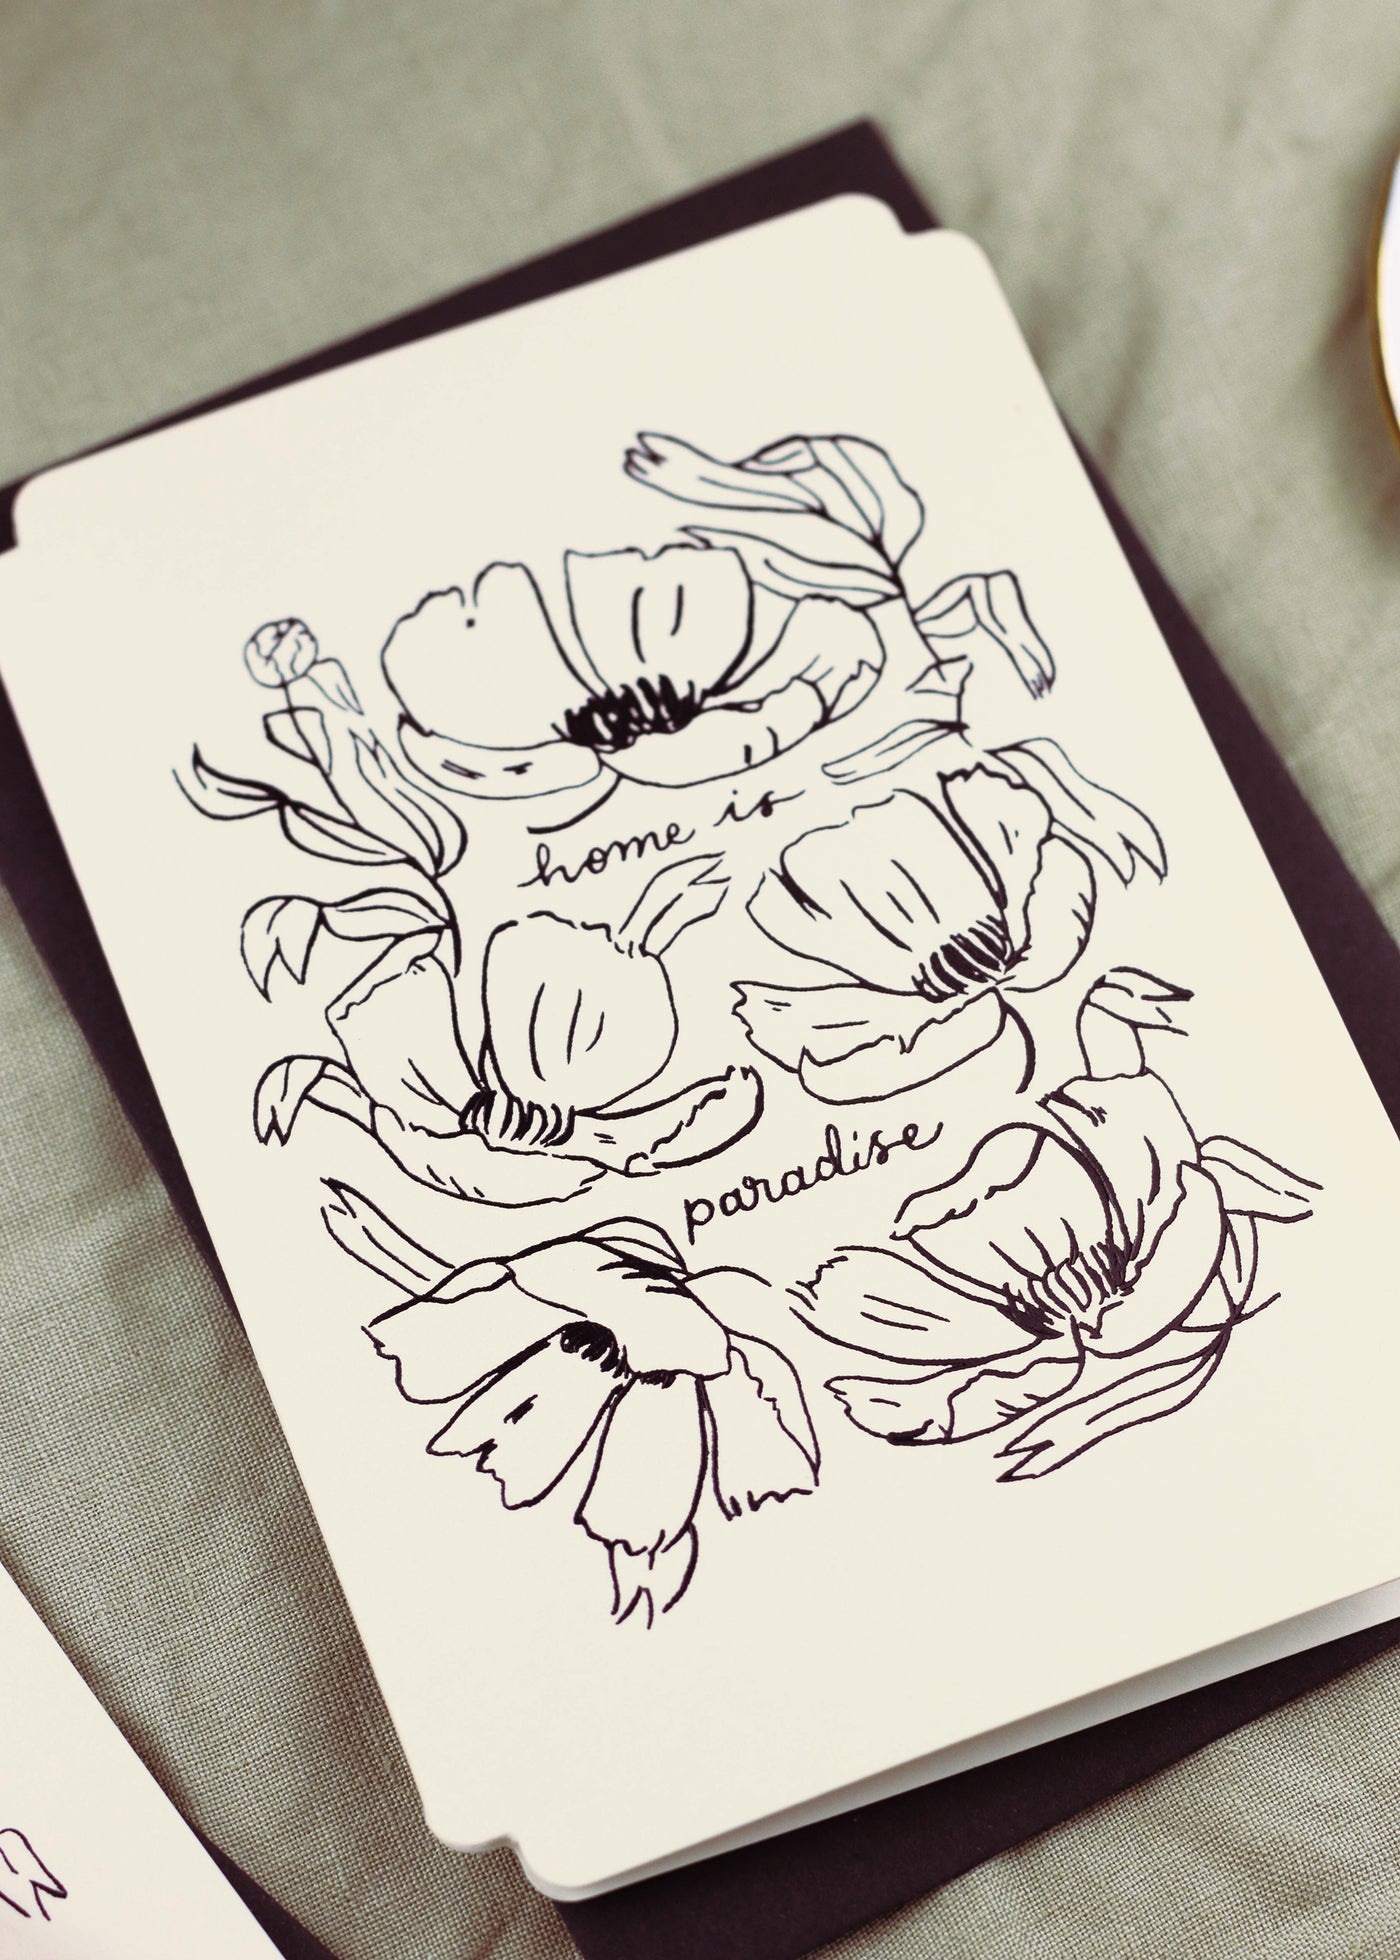 a floral card reads "home is paradise" surrounded by elegant linework flowers